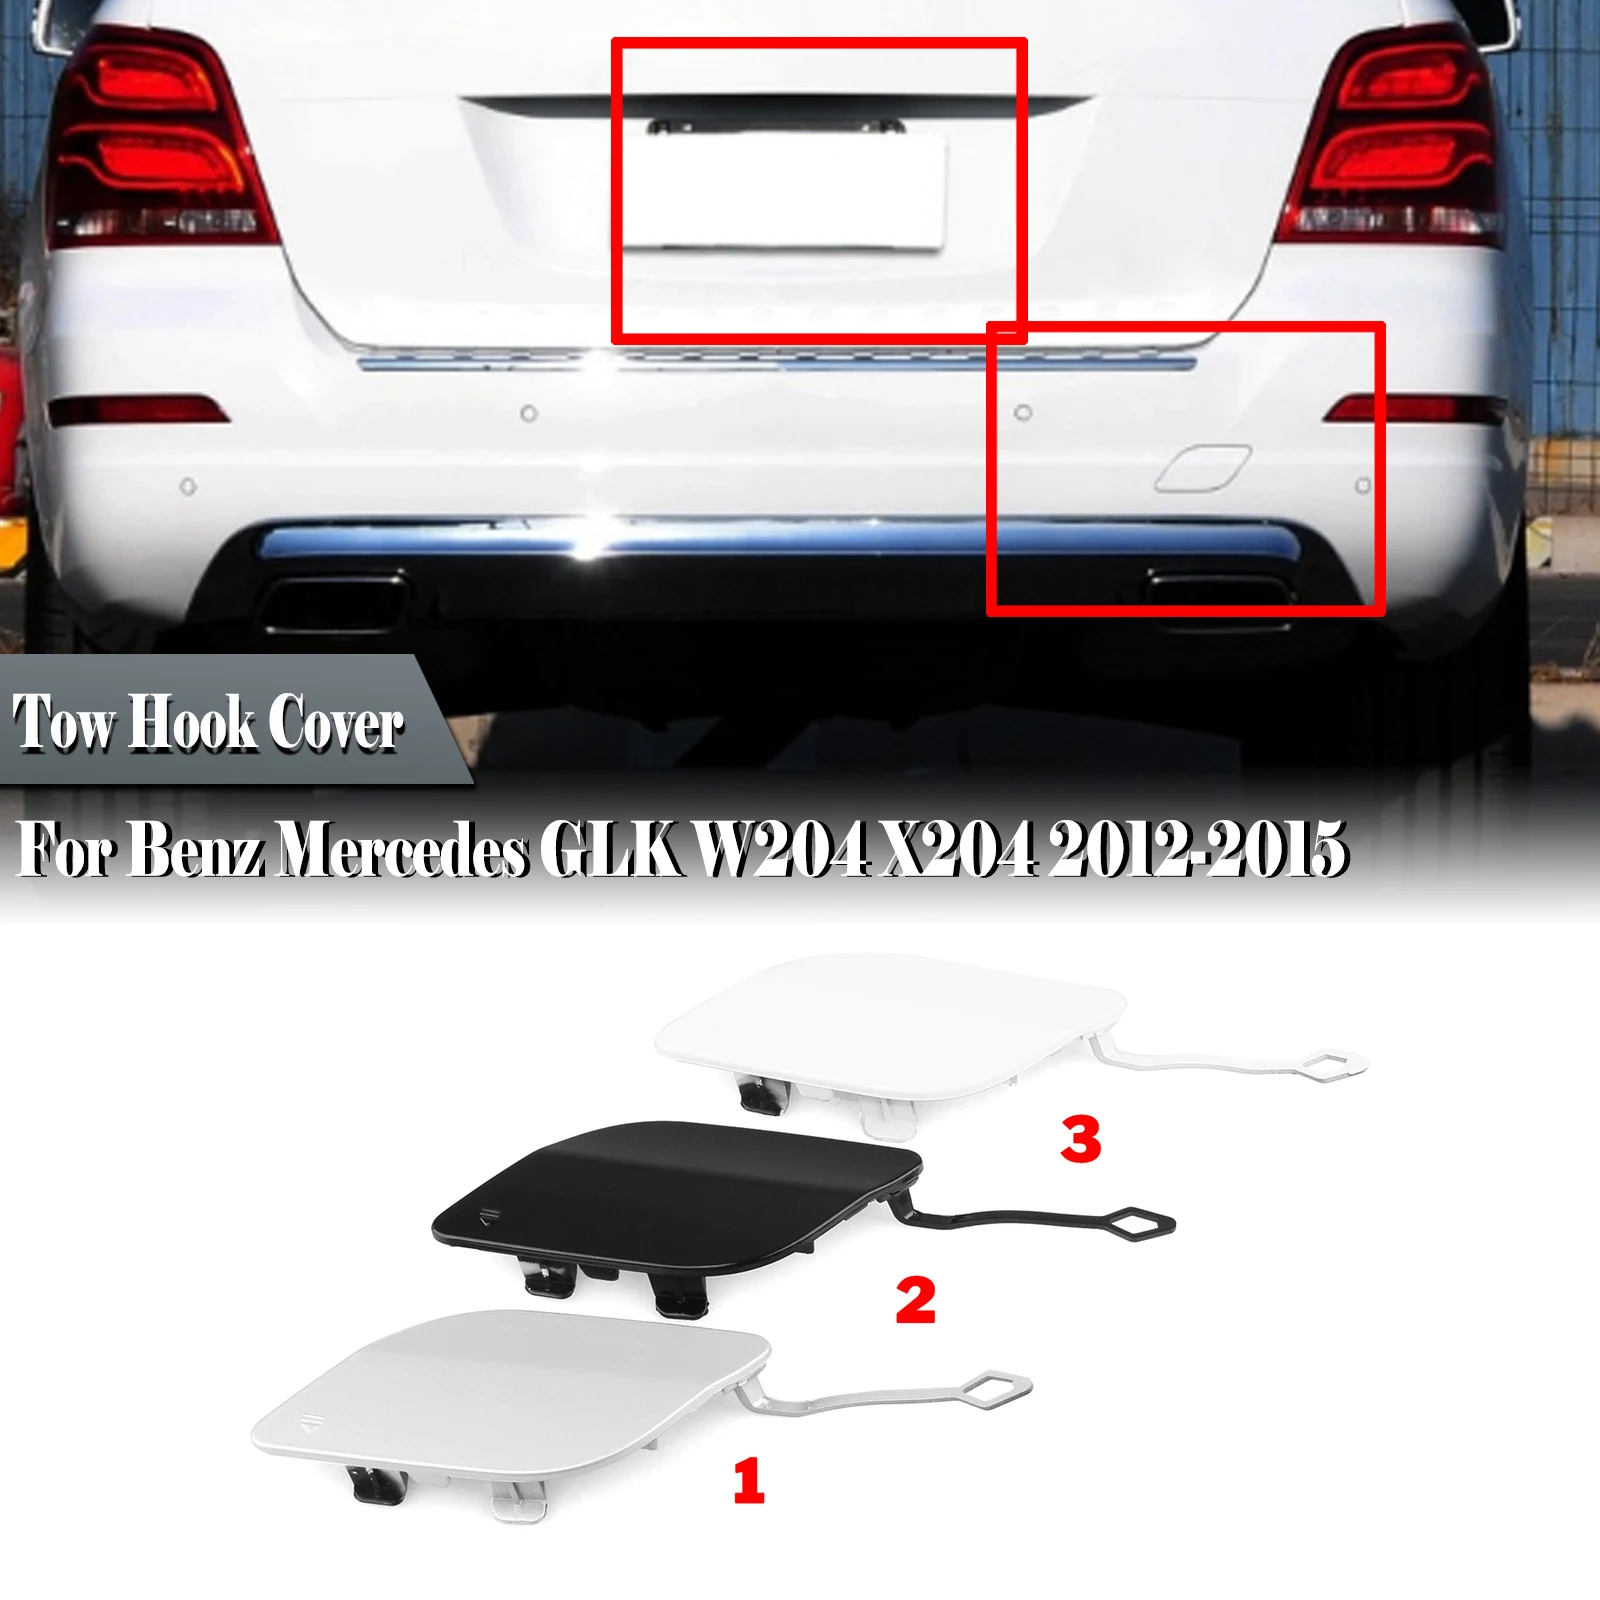 

Rear Tow Hook Eye Hole Cover For Mercedes Benz GLK Class W204 X204 Facelift 2012-2015 GLK200 GLK220 GLK280 GLK300 GLK250 GLK350